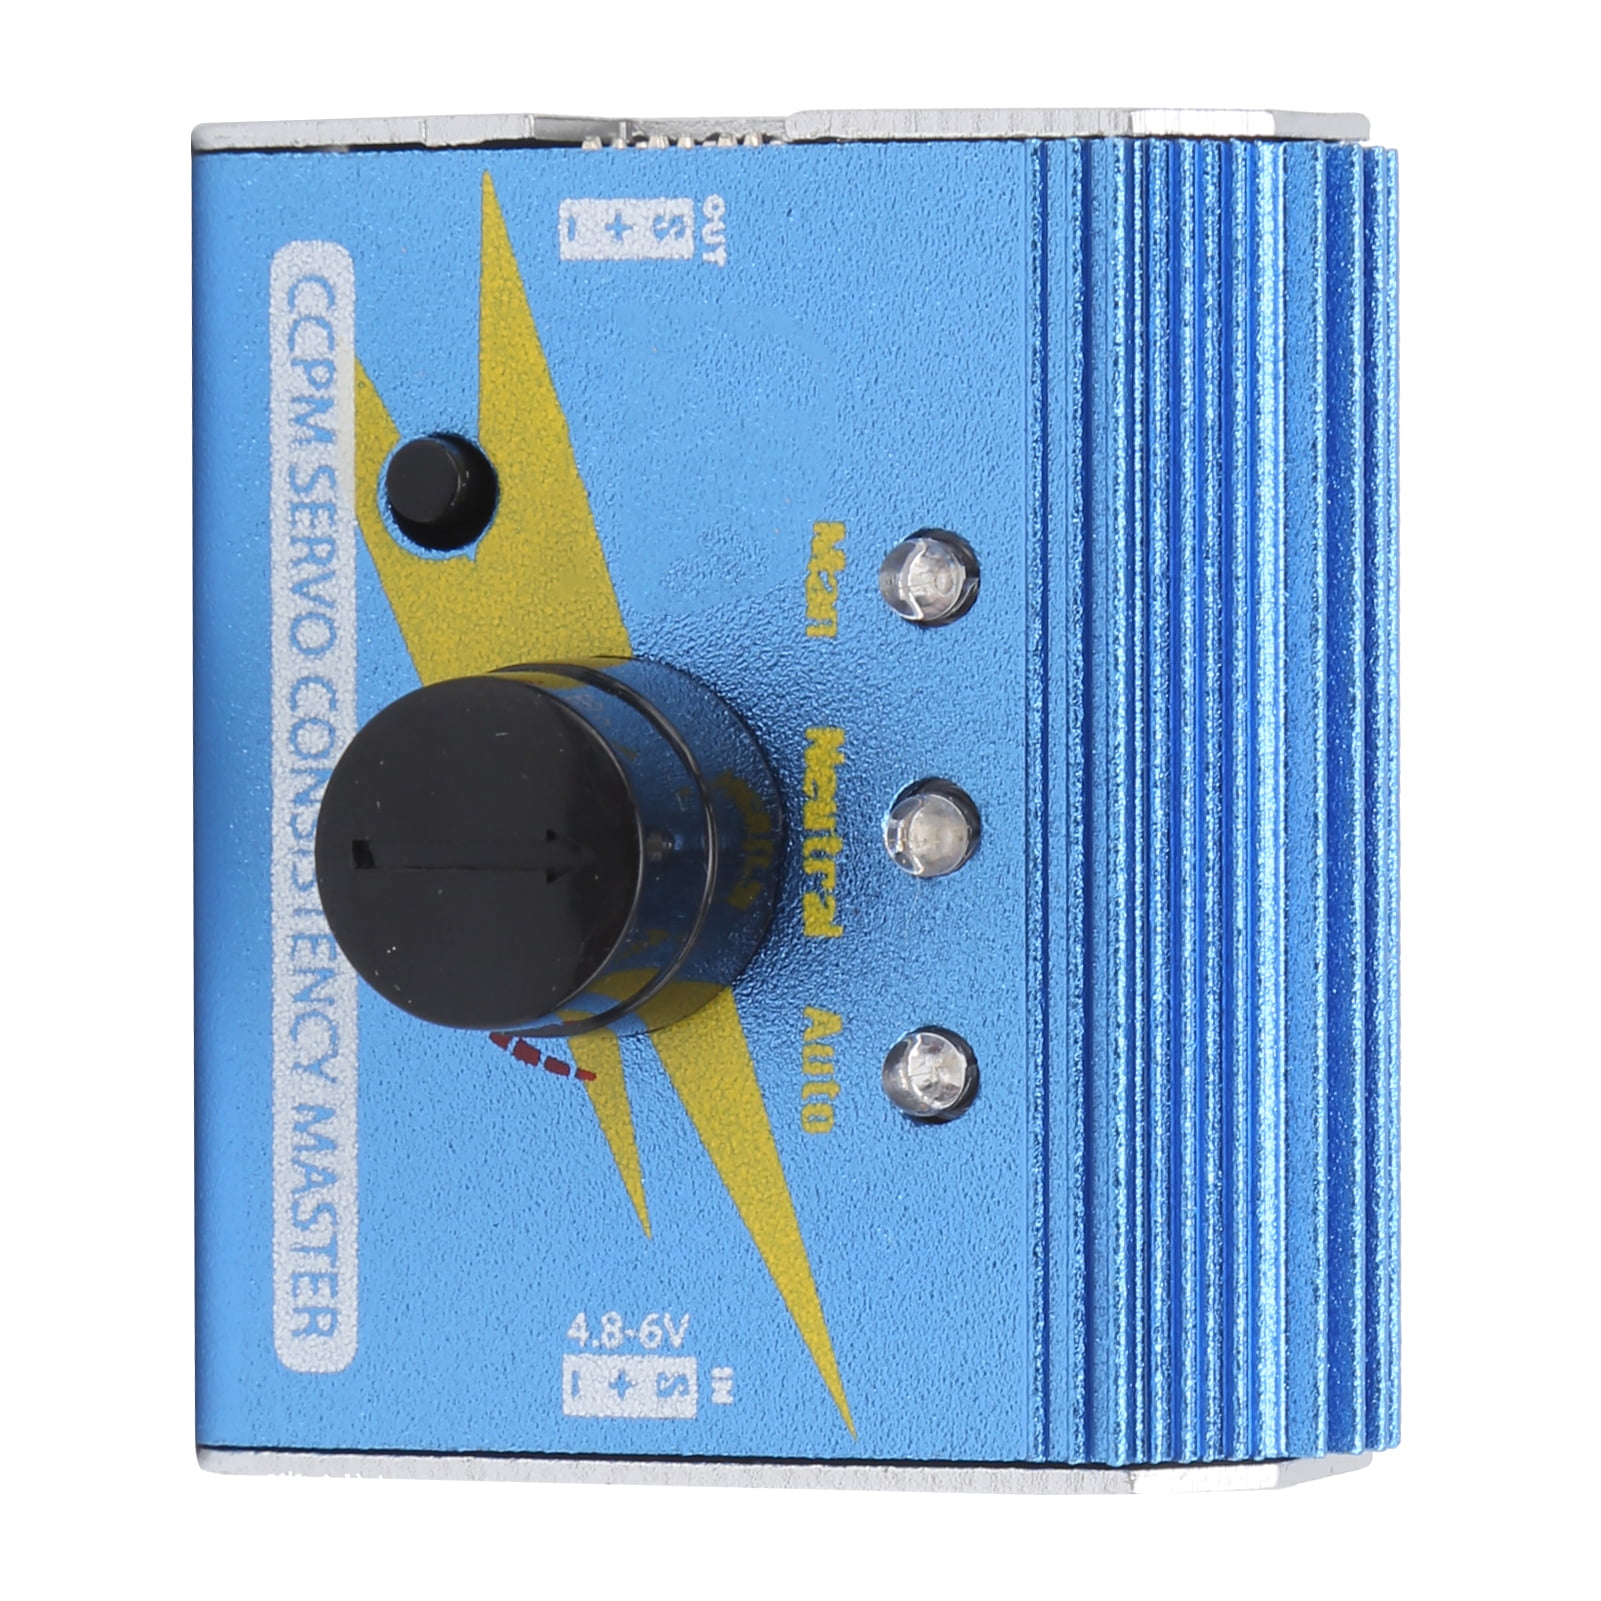 Steering Gear Tester CCPM 3-Mode ESC Servo Motor for RC Helicopters Adjustment